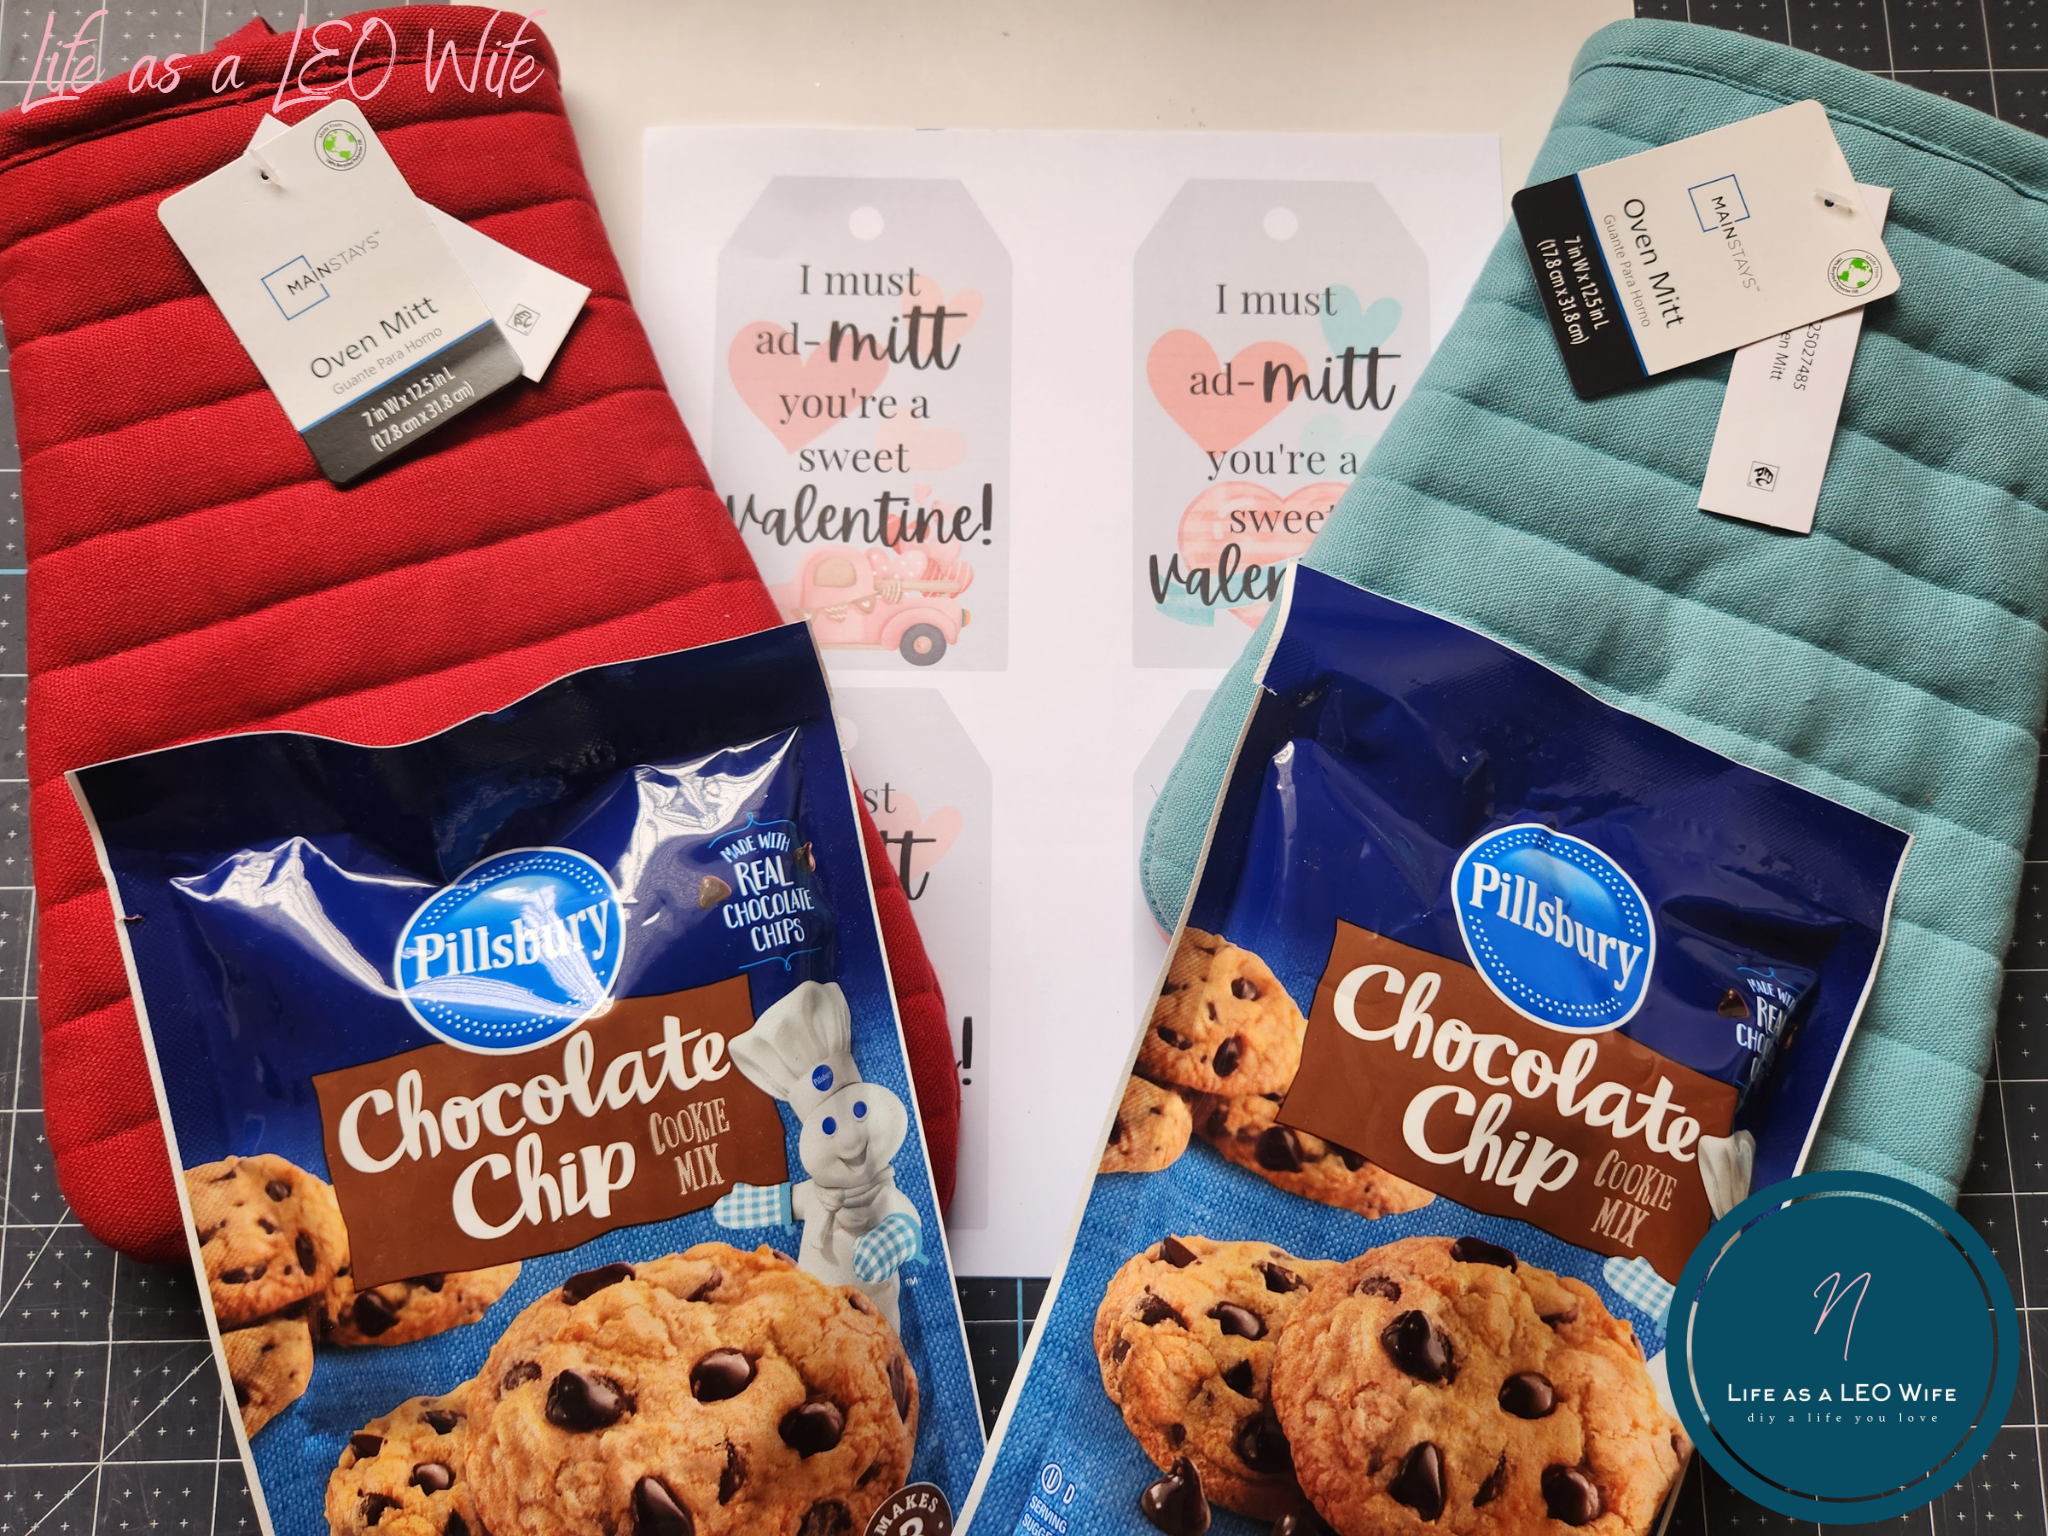 Supplies for a last minute Valentine's gift: 2 bags of chocolate chip cookie mix, a red oven mitt, a blue oven mitt, and my free printable Valentine's gift tag.